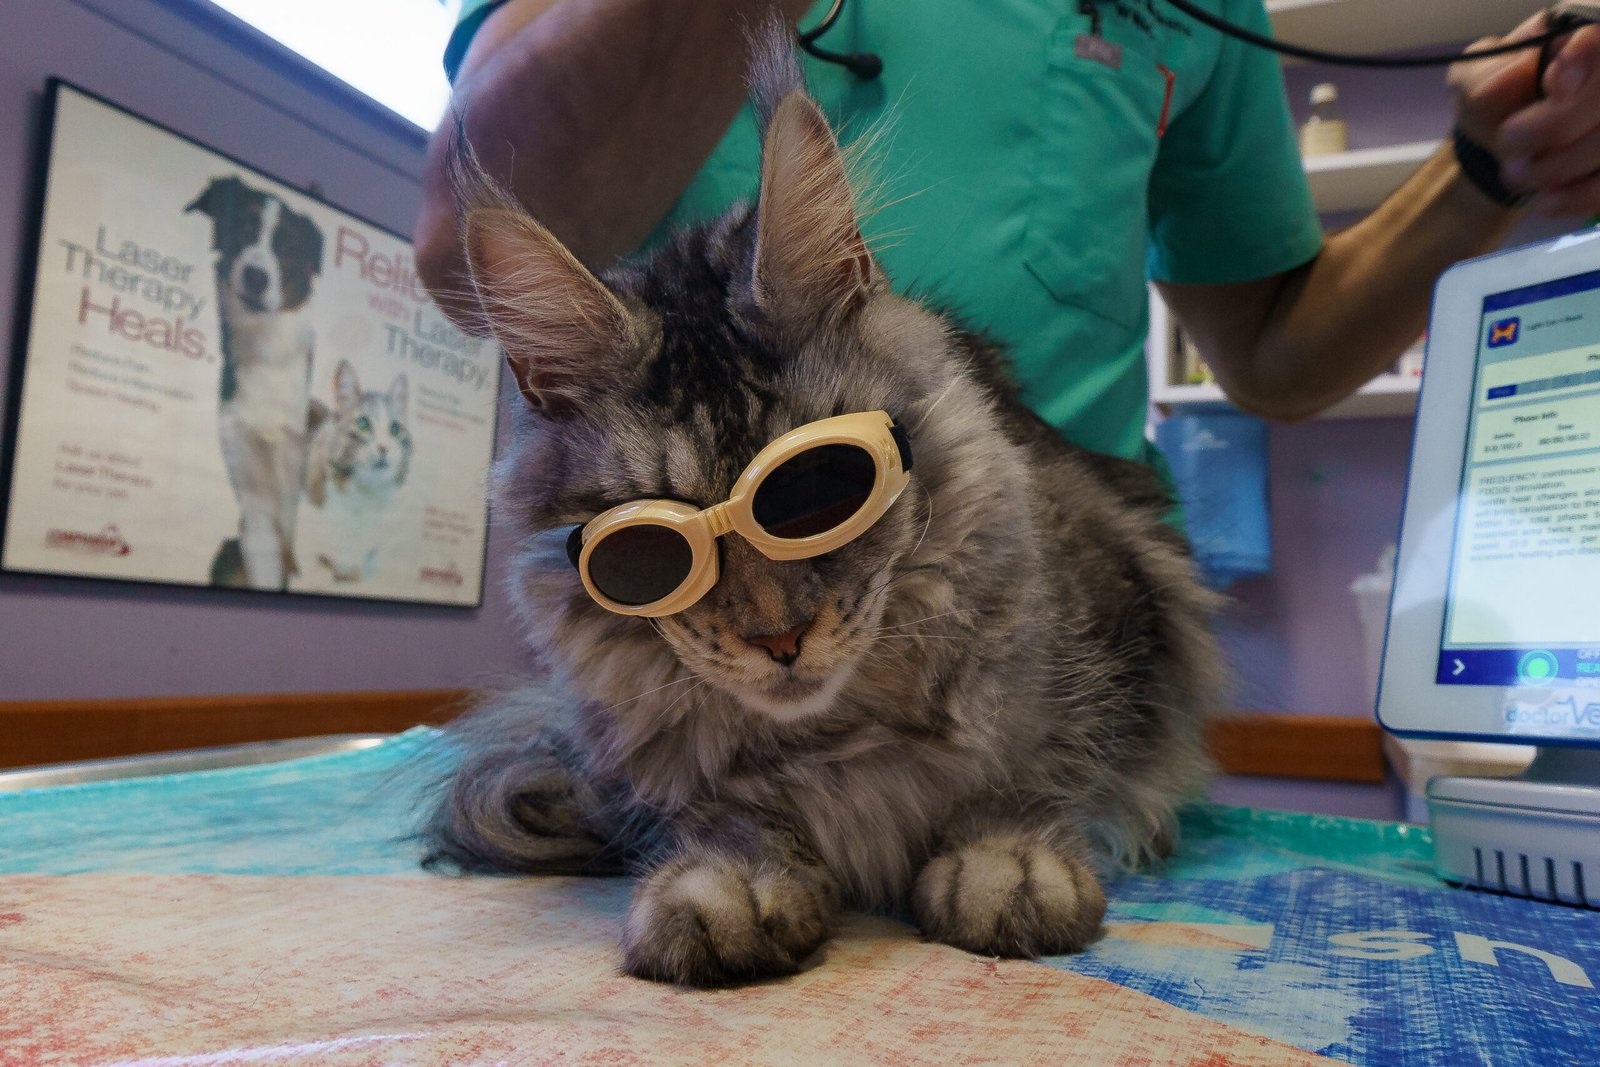 Cute cat with laser therapy protective glasses on at veterinary clinic.